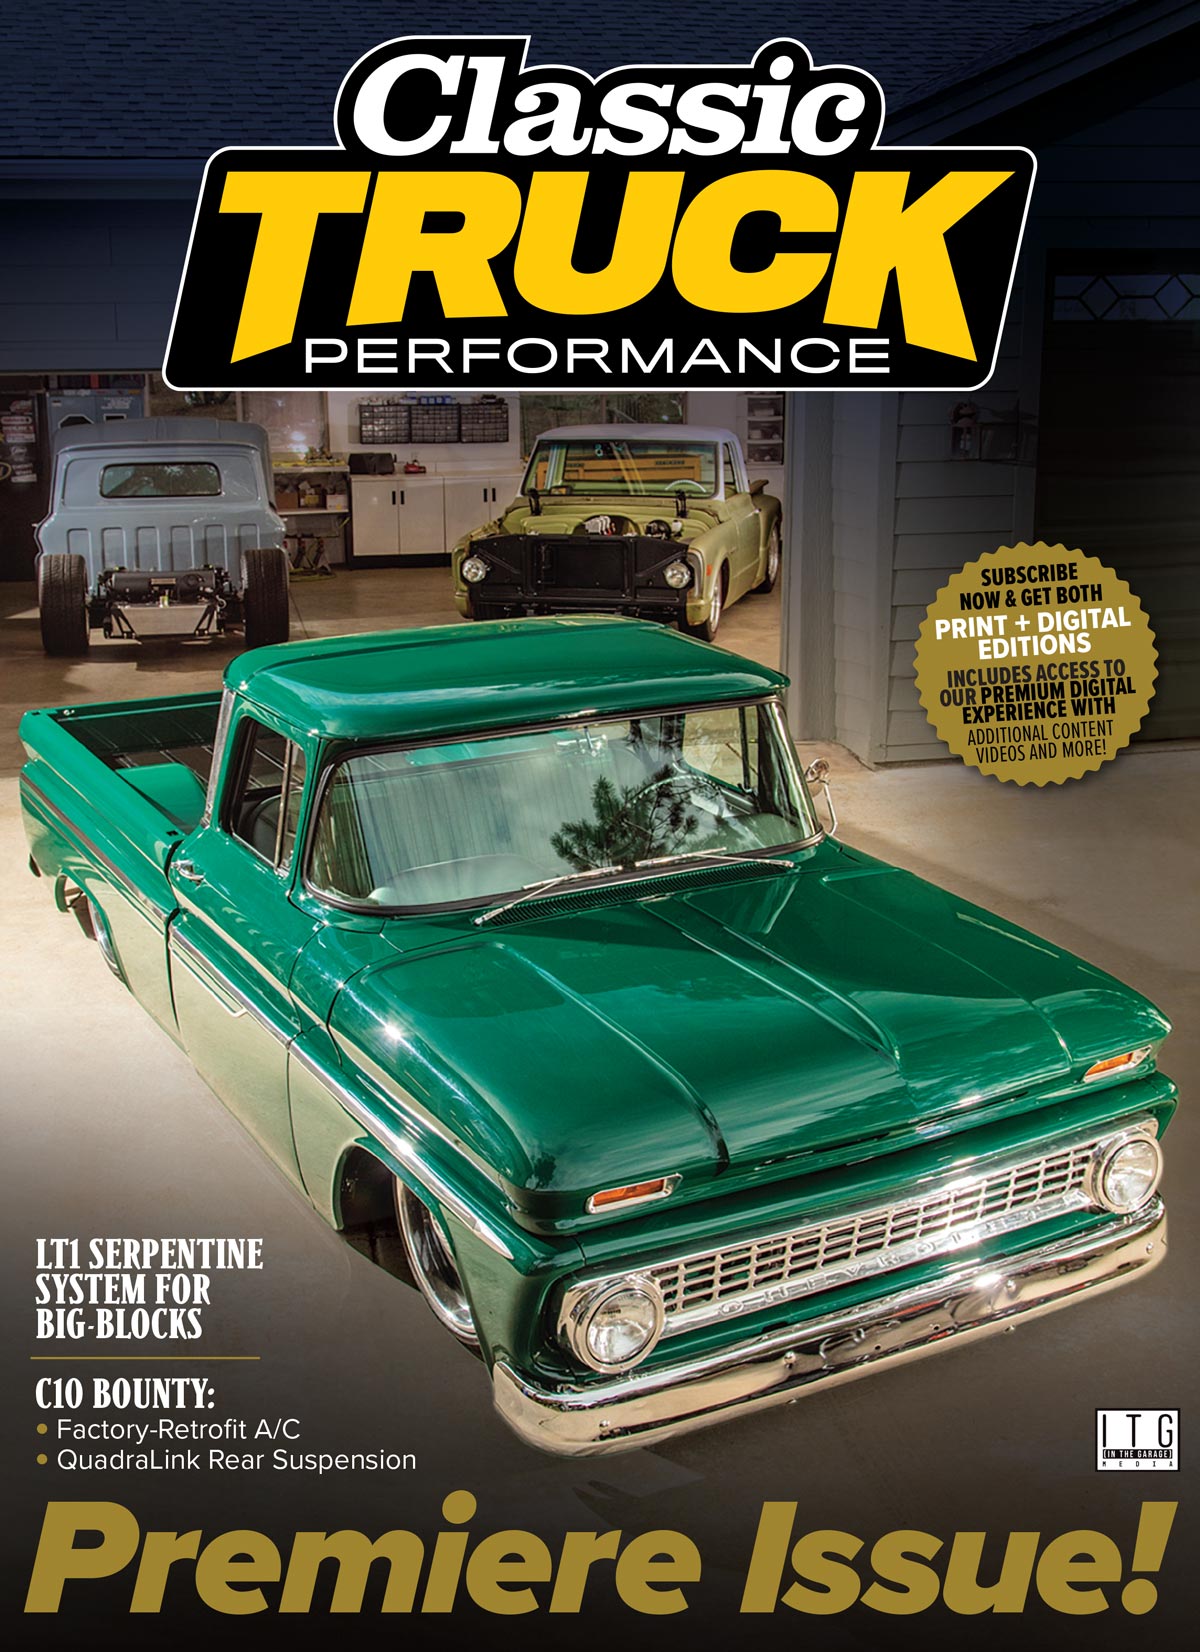 Classic Truck Performance June/July 2020 cover